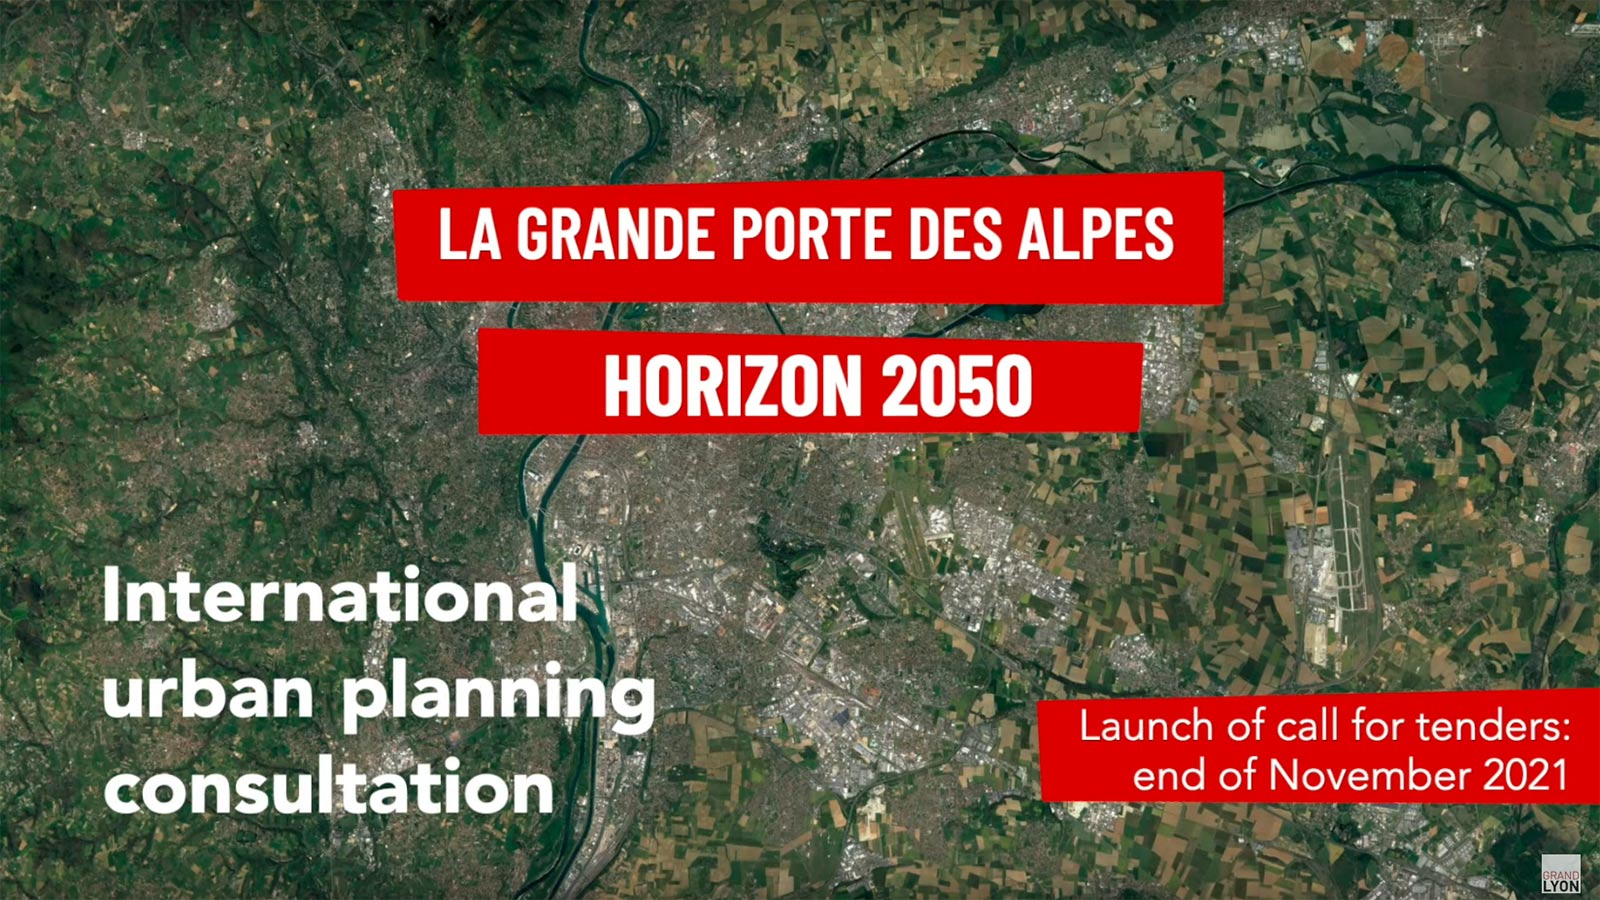 See the news  Take part in Lyon Métropole’s international town planning consultation on development in the Grande Porte des Alpes area (Bron, Chassieu and Saint-Priest) between now and 2050